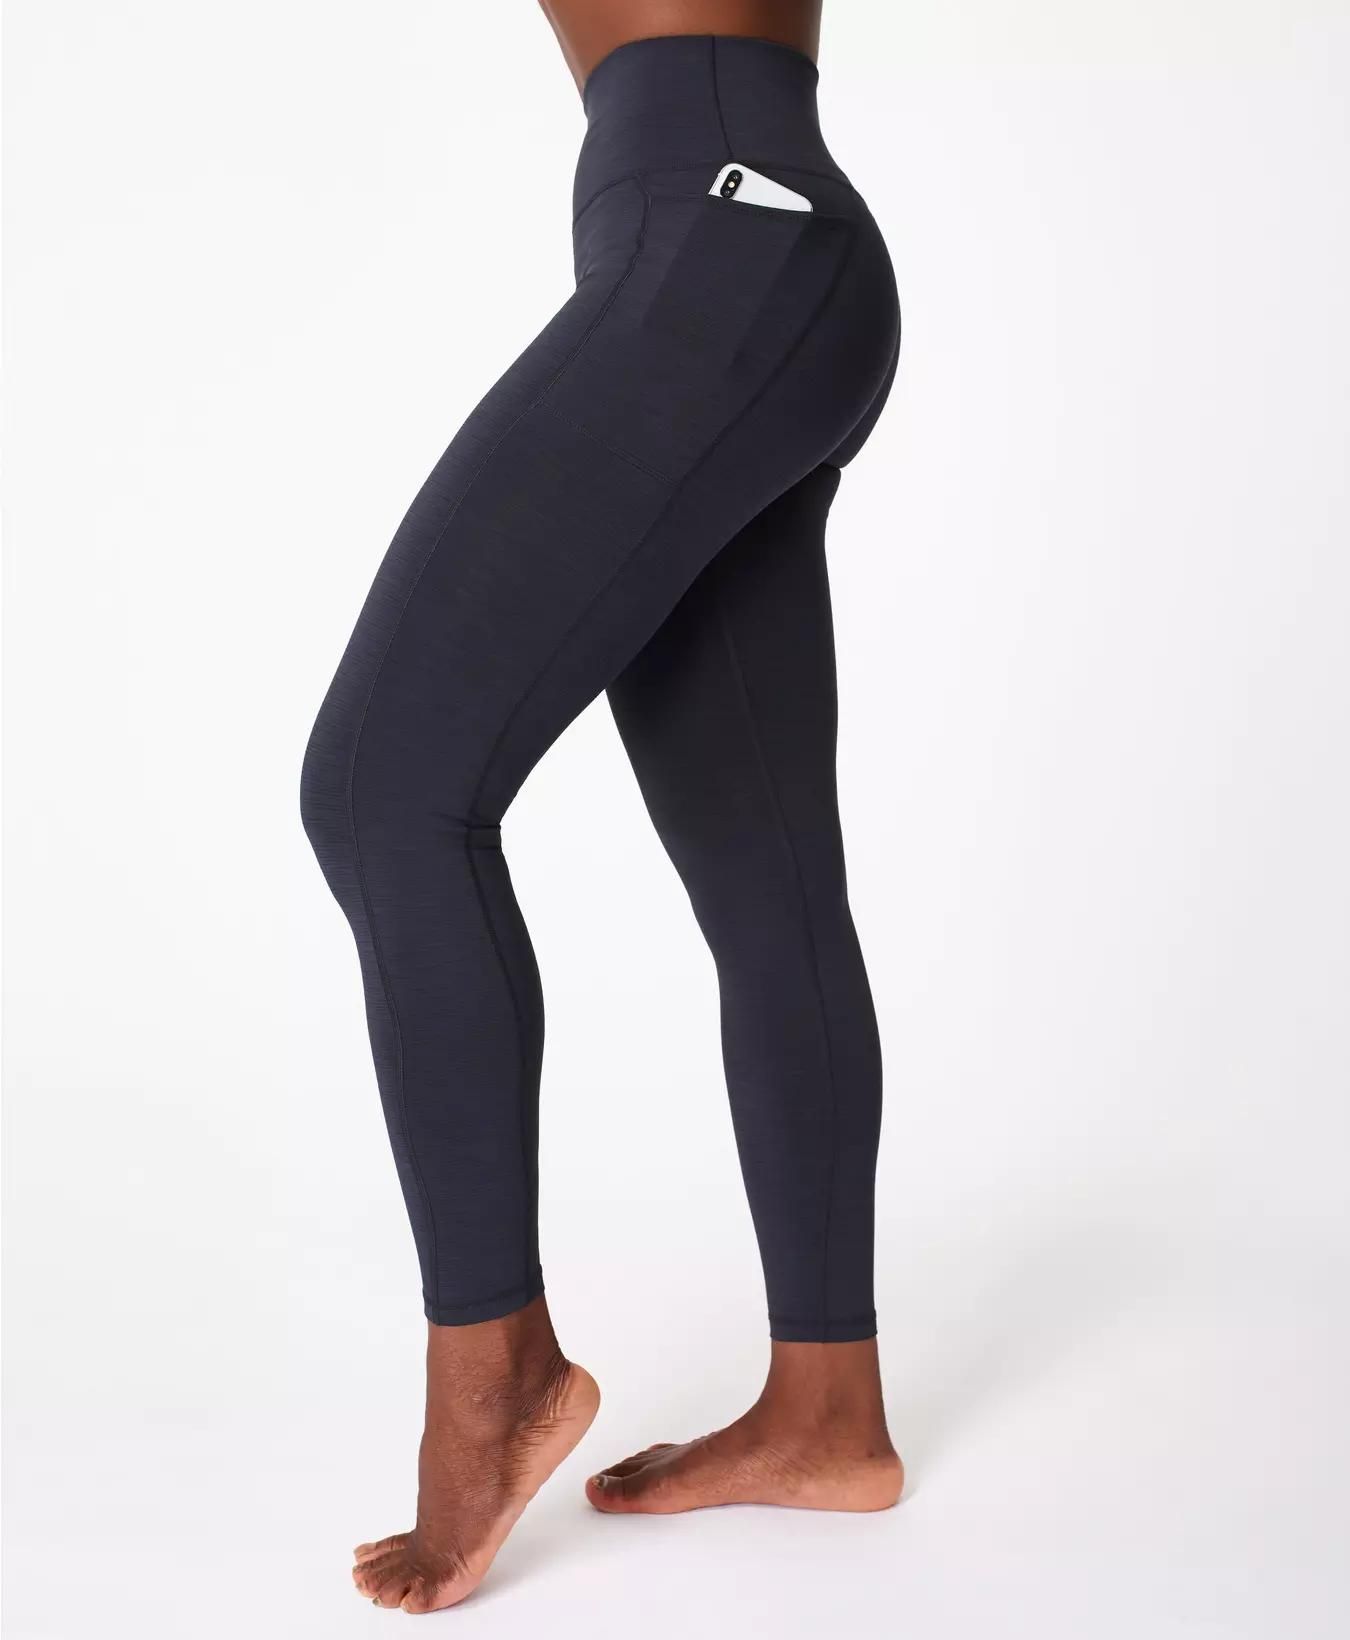 The 8 Best Yoga Pants and Leggings that are budgetfriendly and suitable  for all types of Yoga  The Yoga Nomads